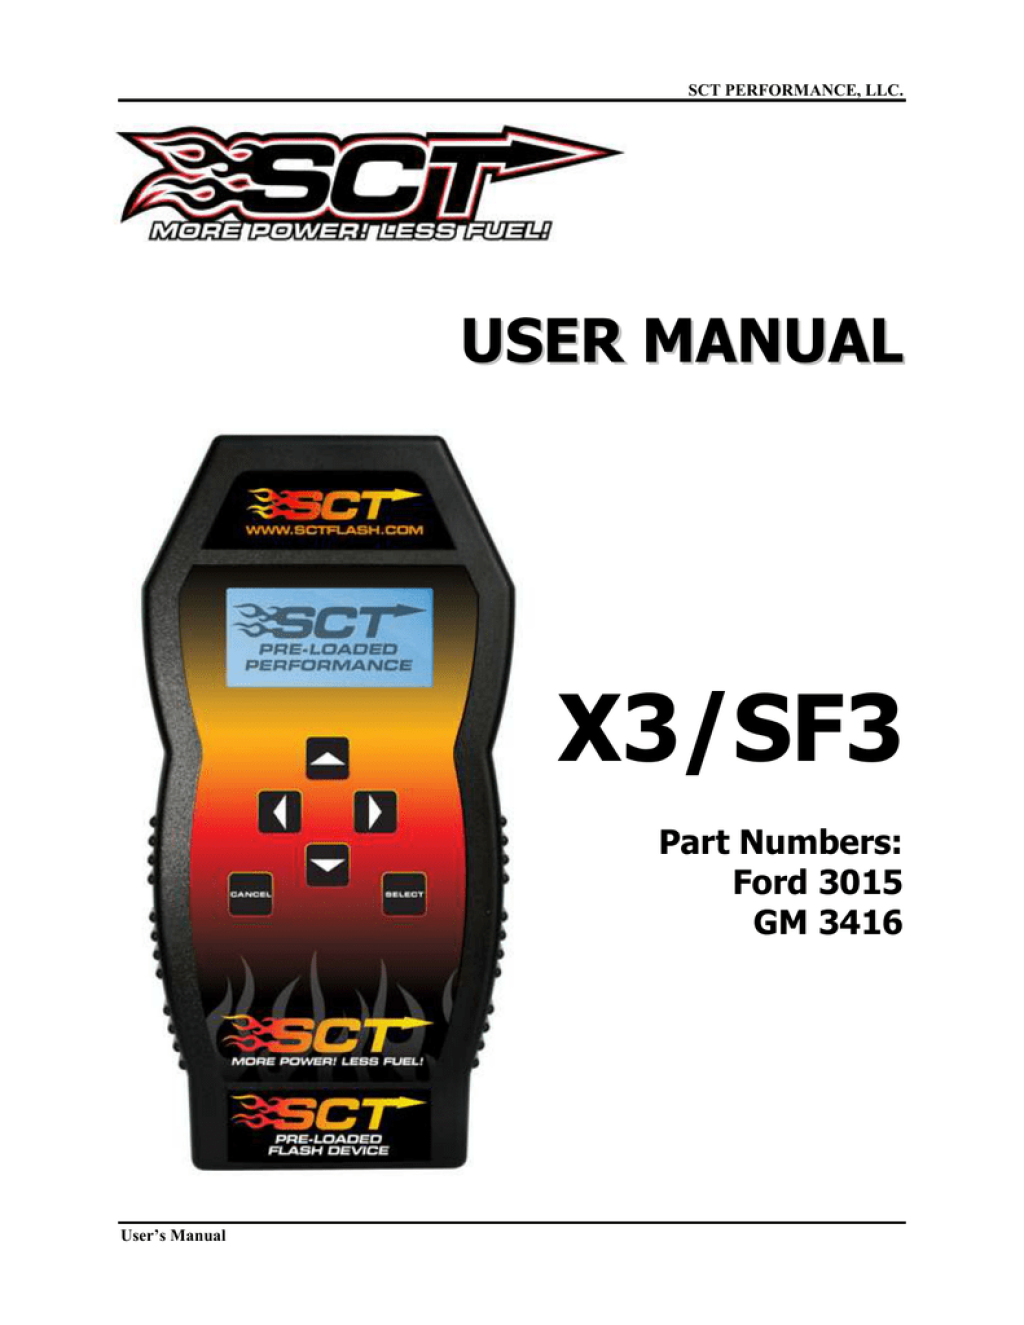 Picture of: SCT Performance® SF Power Flash Programmer  Manualzz